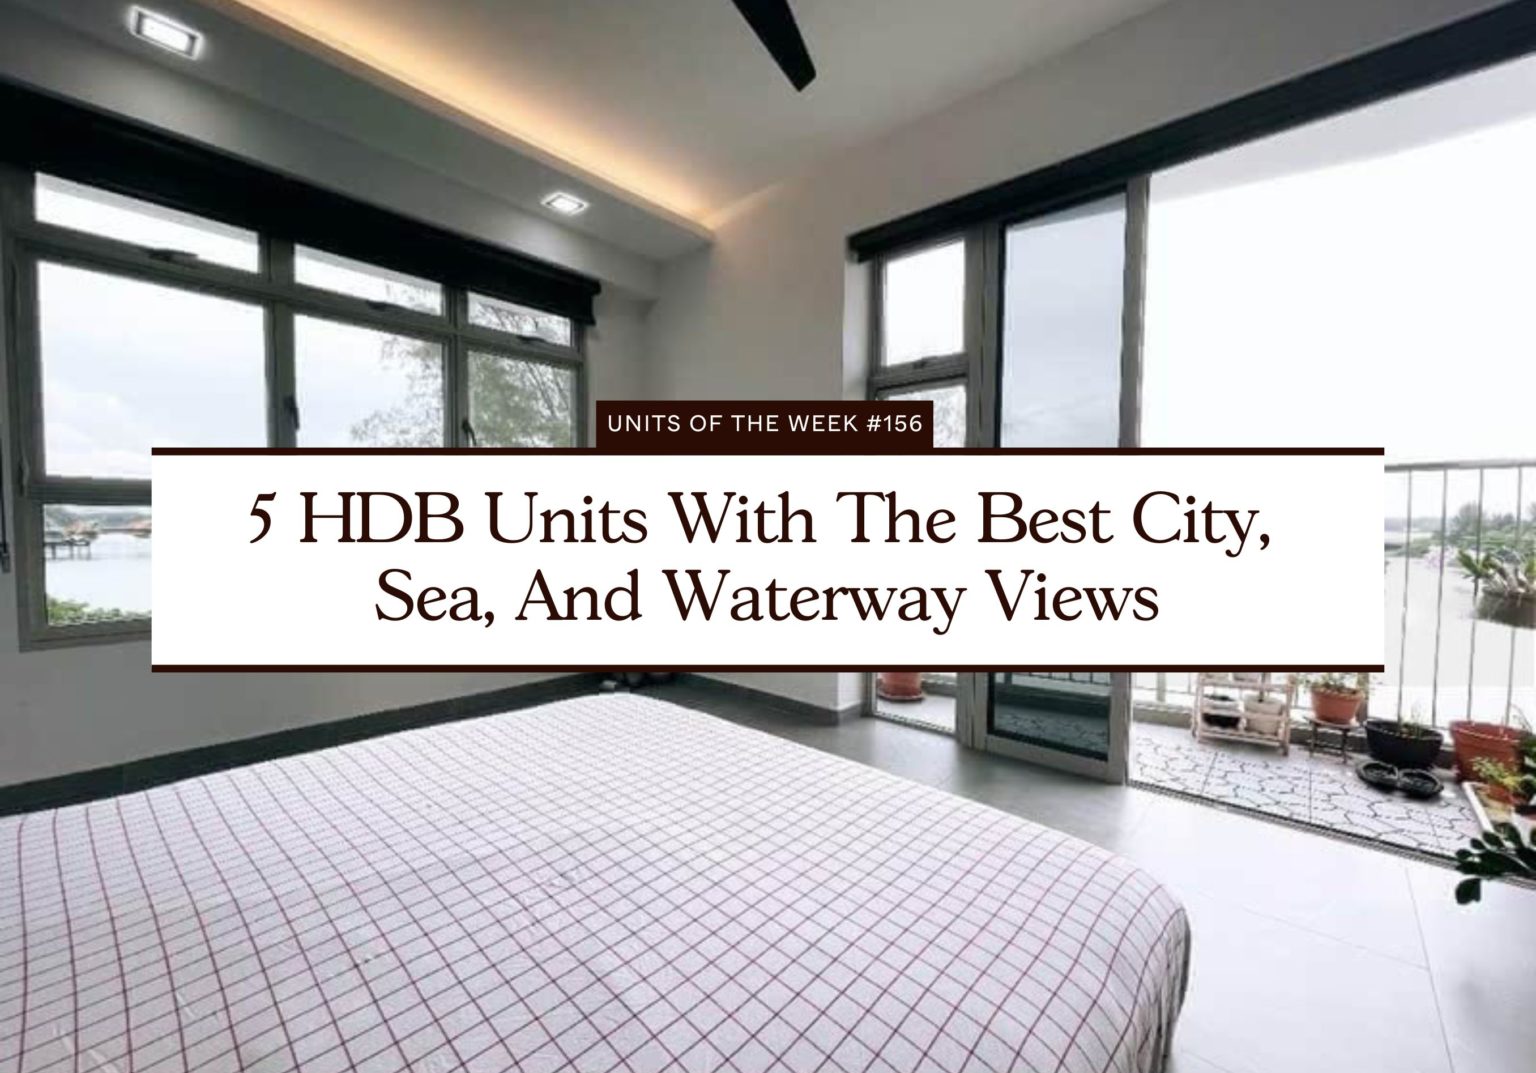 5 HDB Units With The Best City Sea And Waterway Views